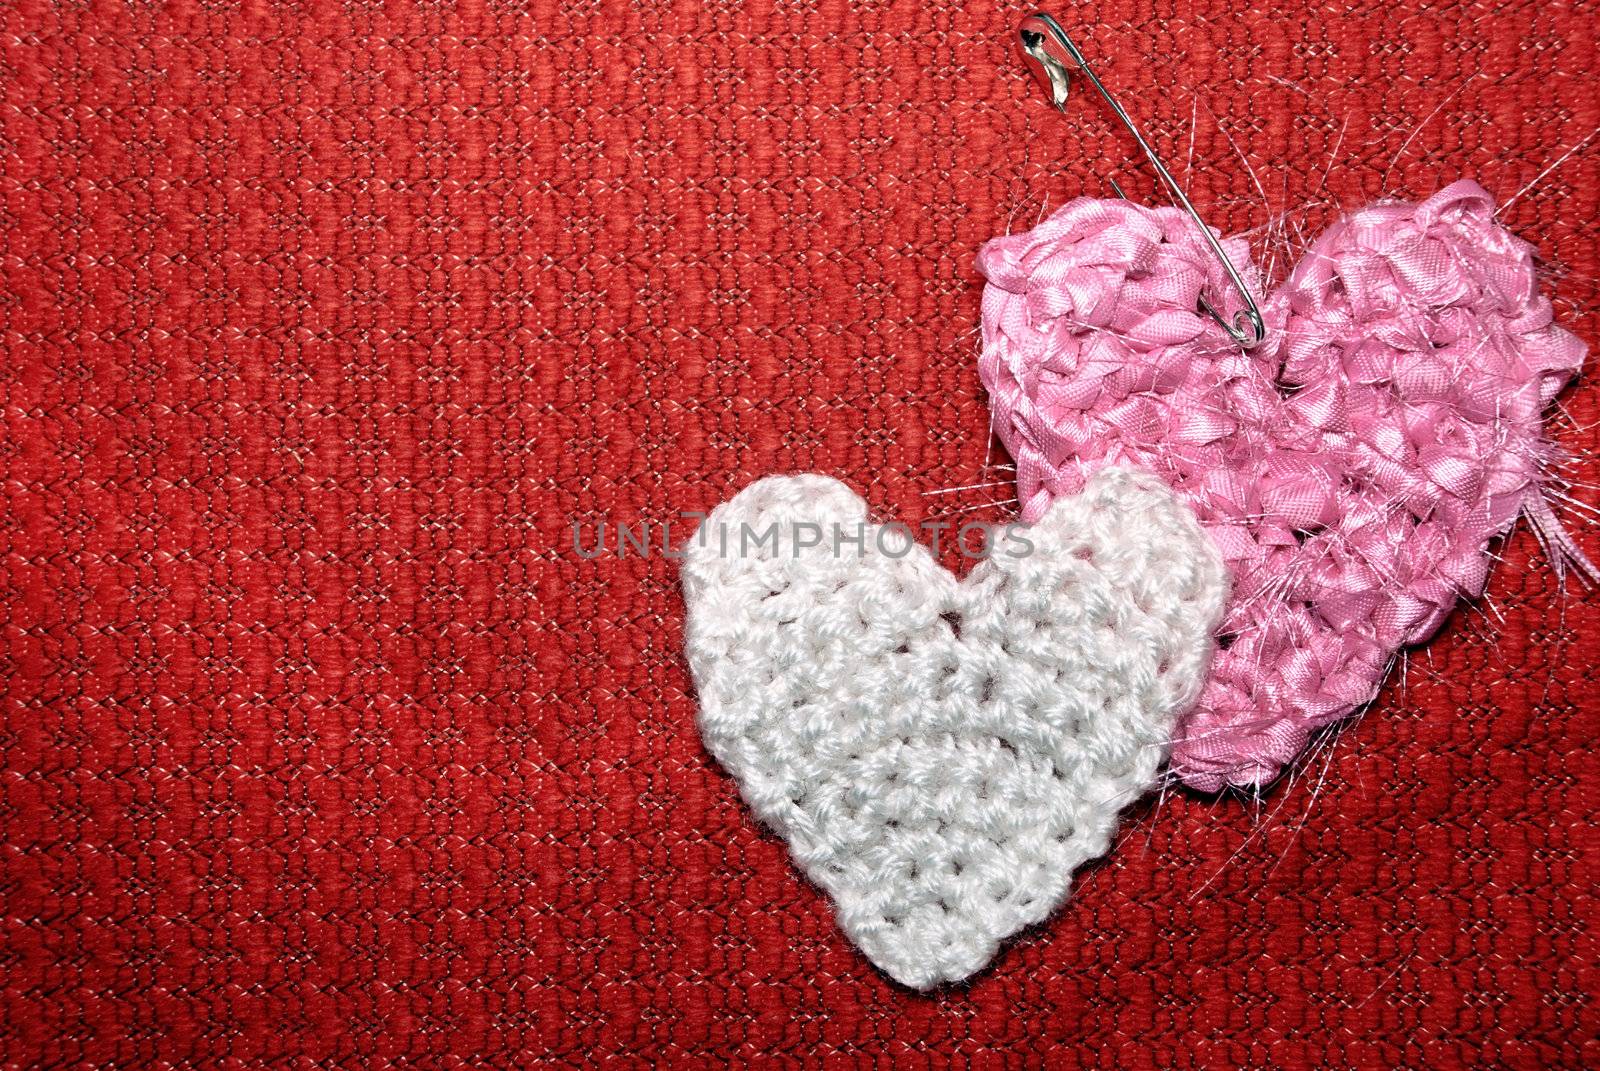 Two hearts on a red knitted textile background.